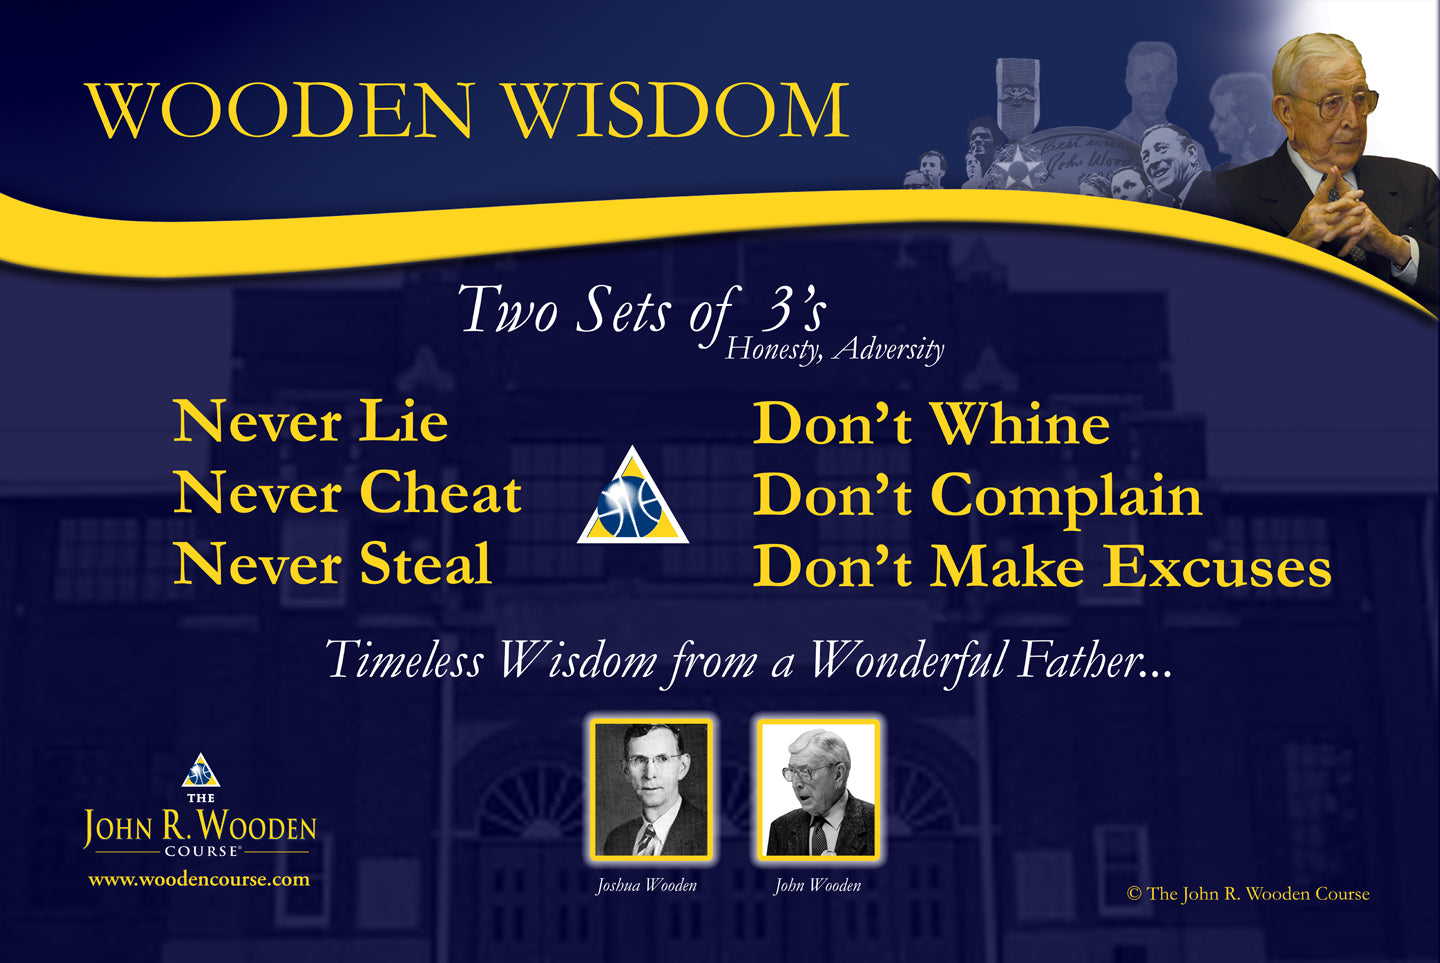 "The Nevers and The Don'ts" Two Sets of 3’s Values Poster